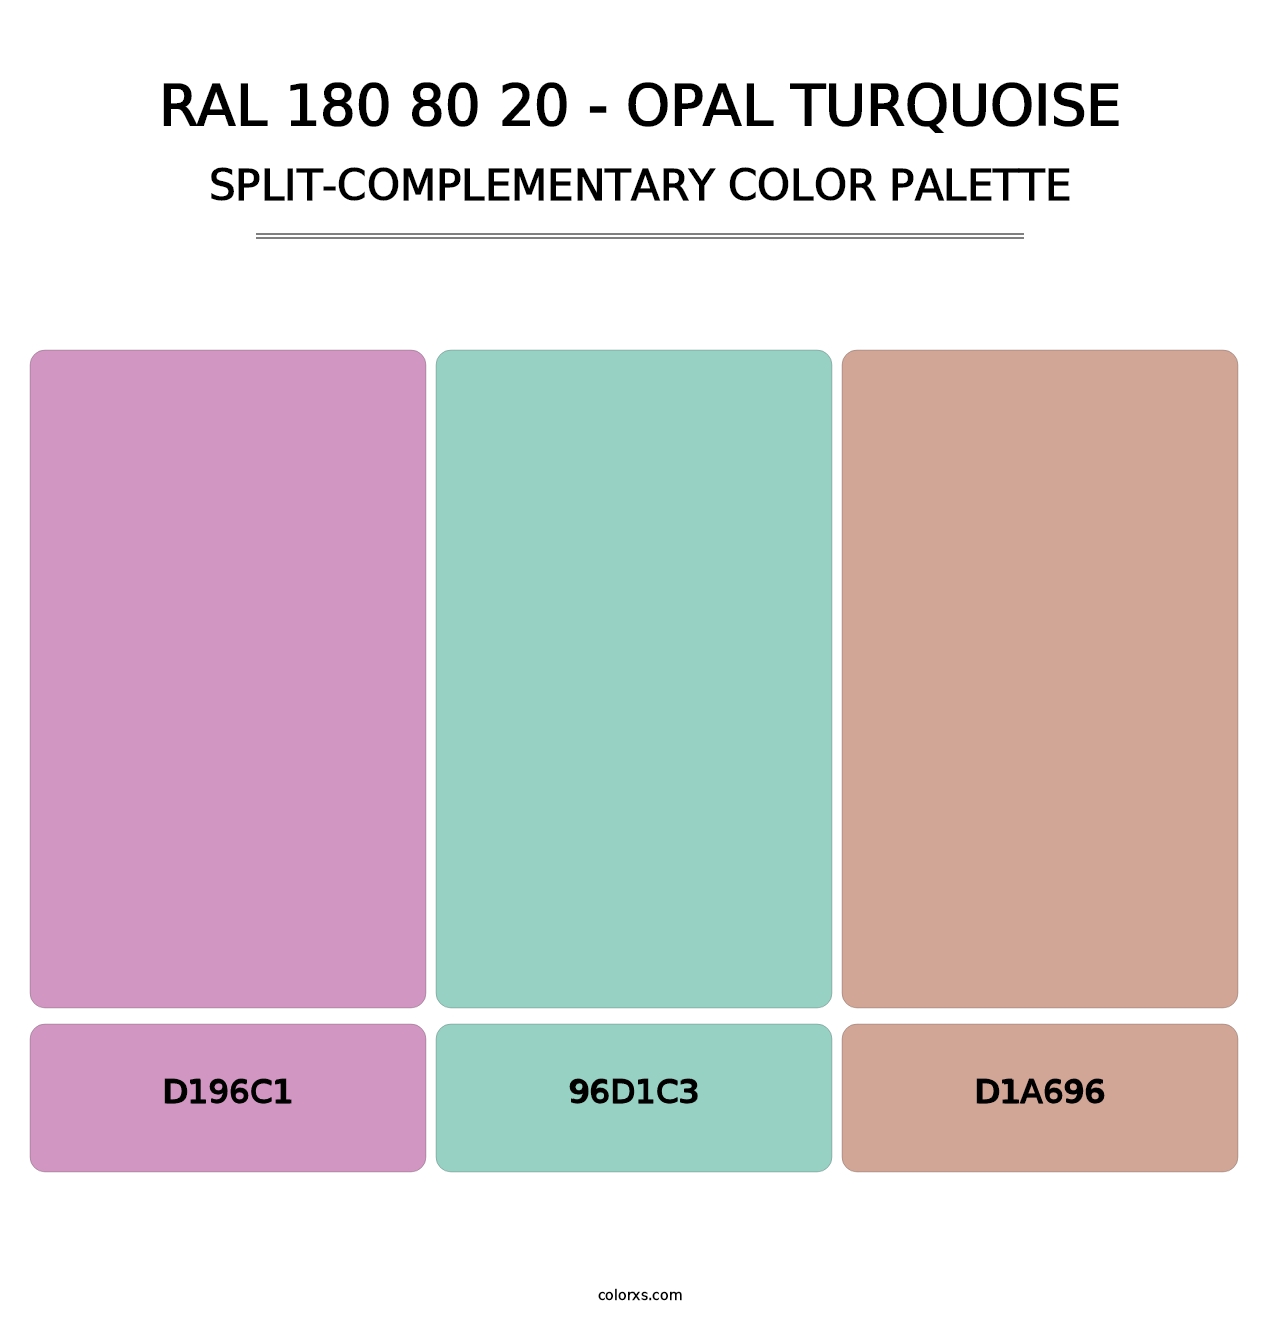 RAL 180 80 20 - Opal Turquoise - Split-Complementary Color Palette